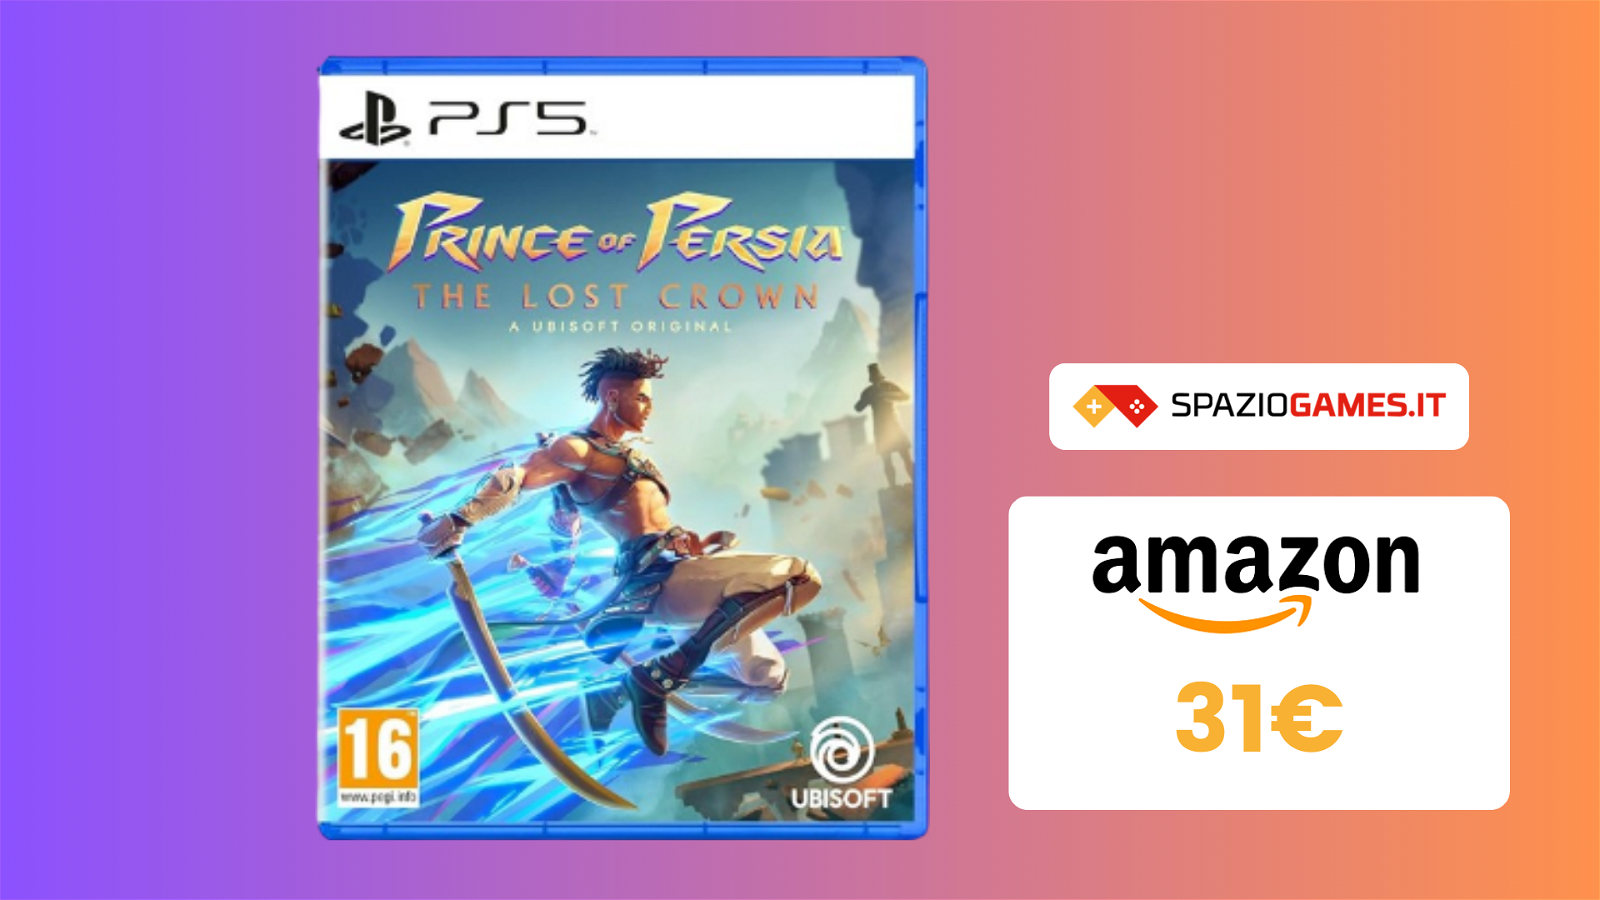 Prince of Persia: The Lost Crown per PS5 a 31€! WOW!